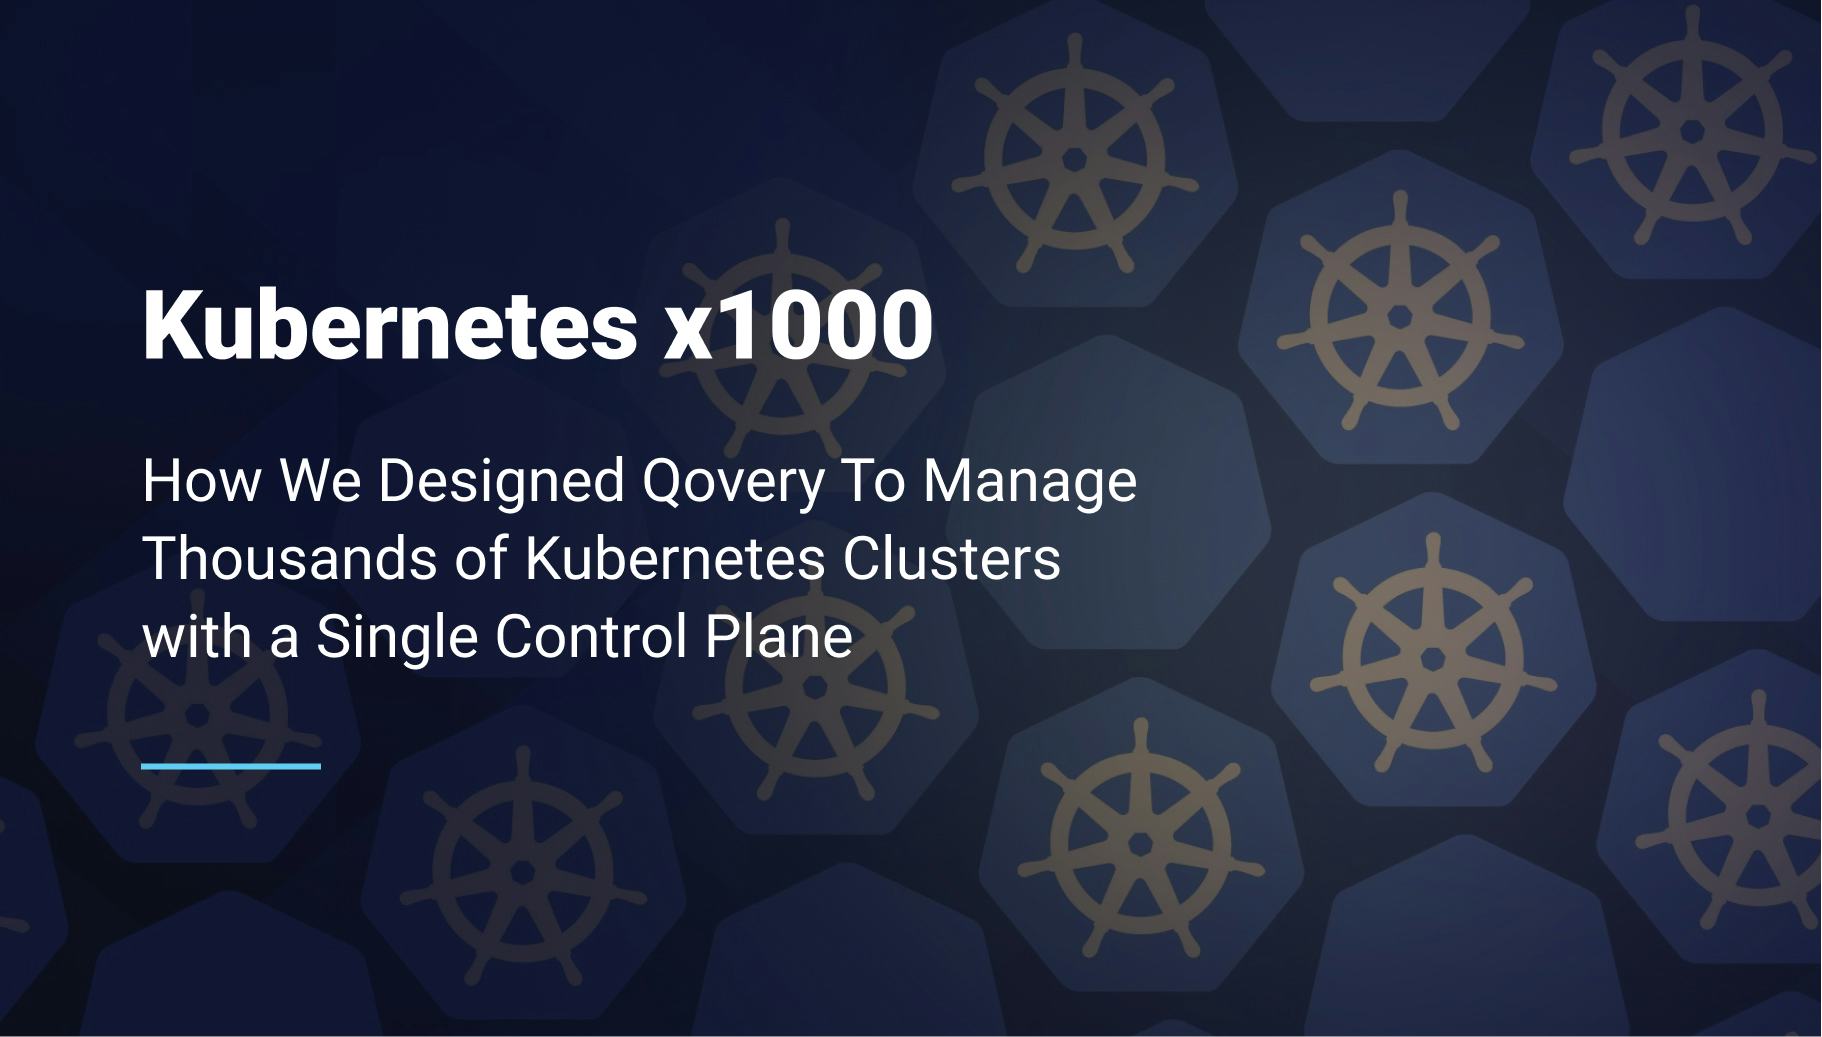 How We Designed Qovery To Manage Thousands of Kubernetes Clusters with a Single Control Plane